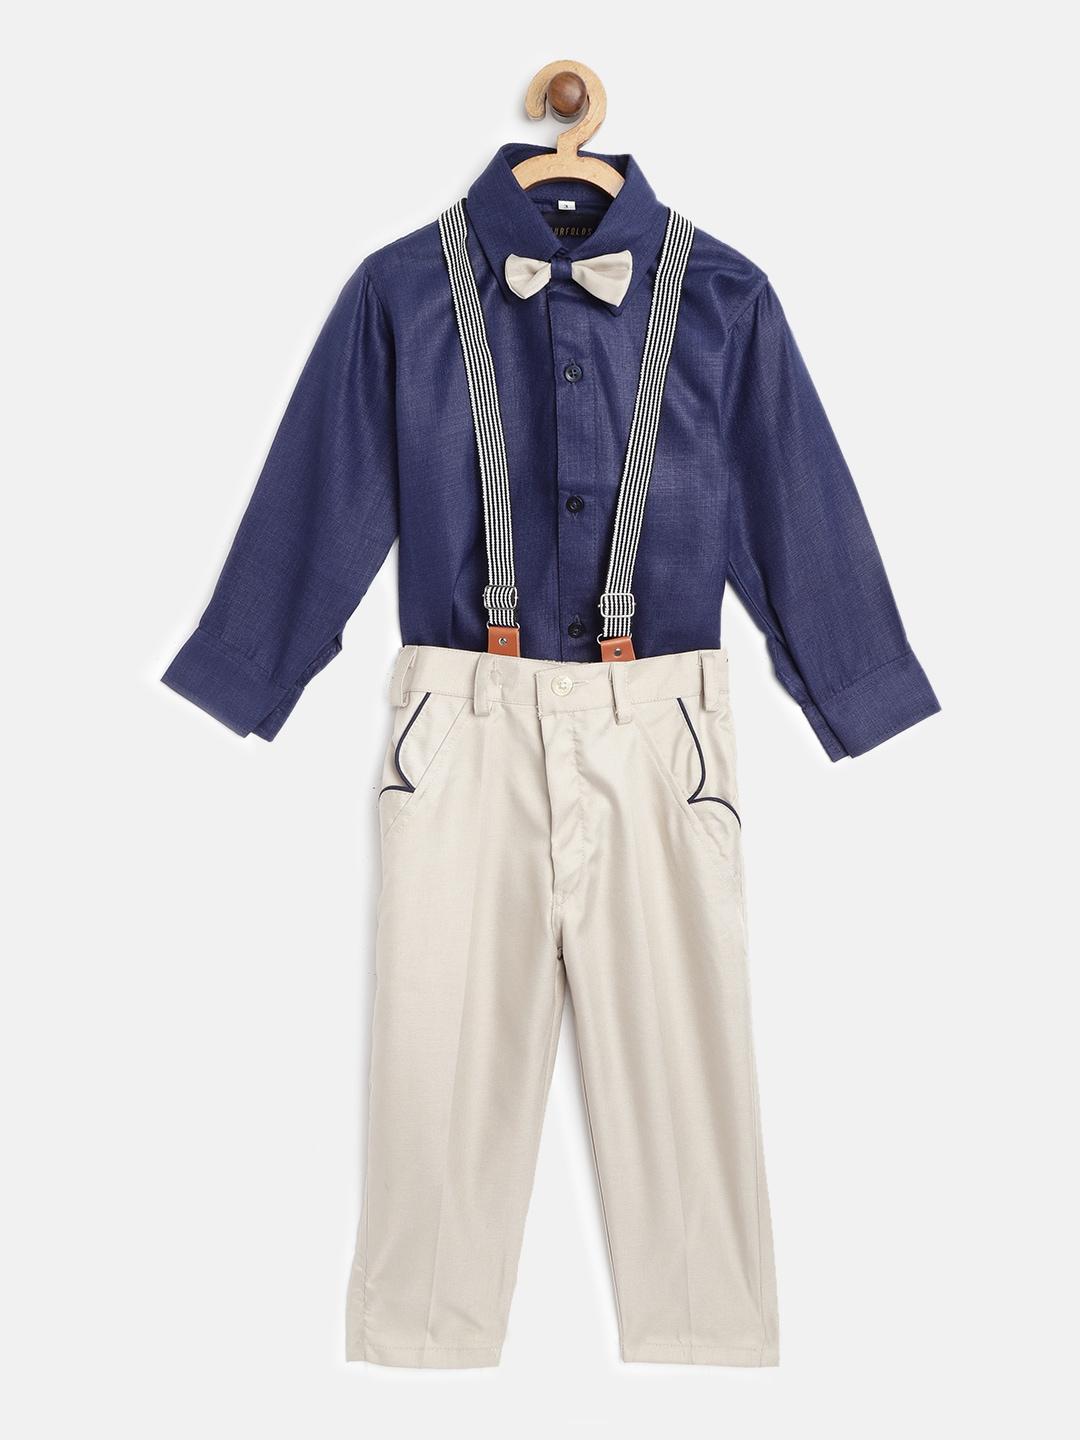 FOURFOLDS Boys Navy Blue & Off-White Solid Clothing Set With Suspenders & Bow